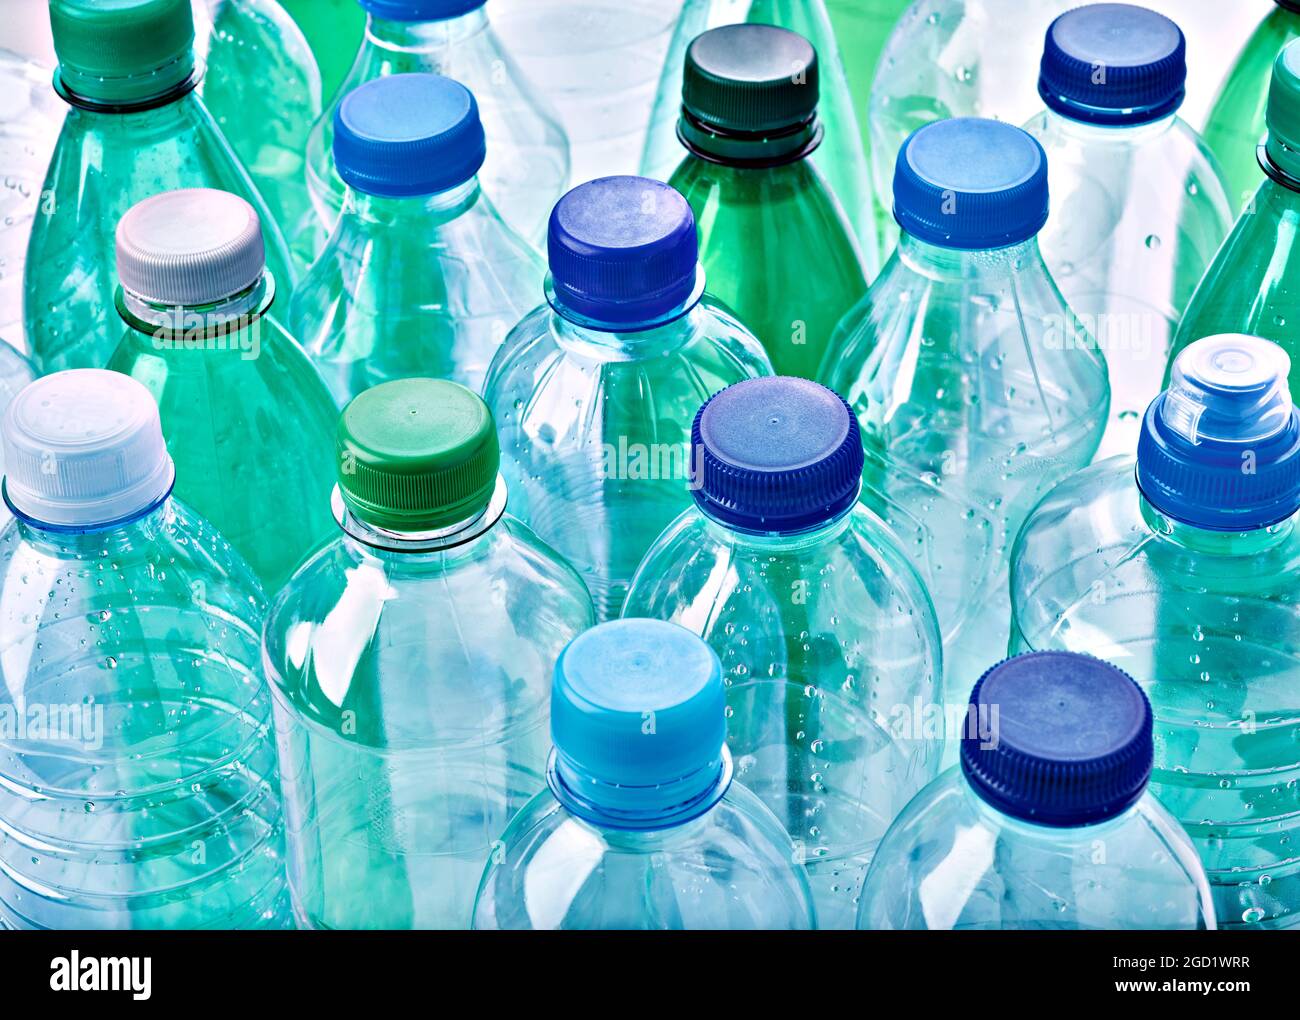 plastic bottle empty transparent recycling container water environment drink garbage beverage Stock Photo